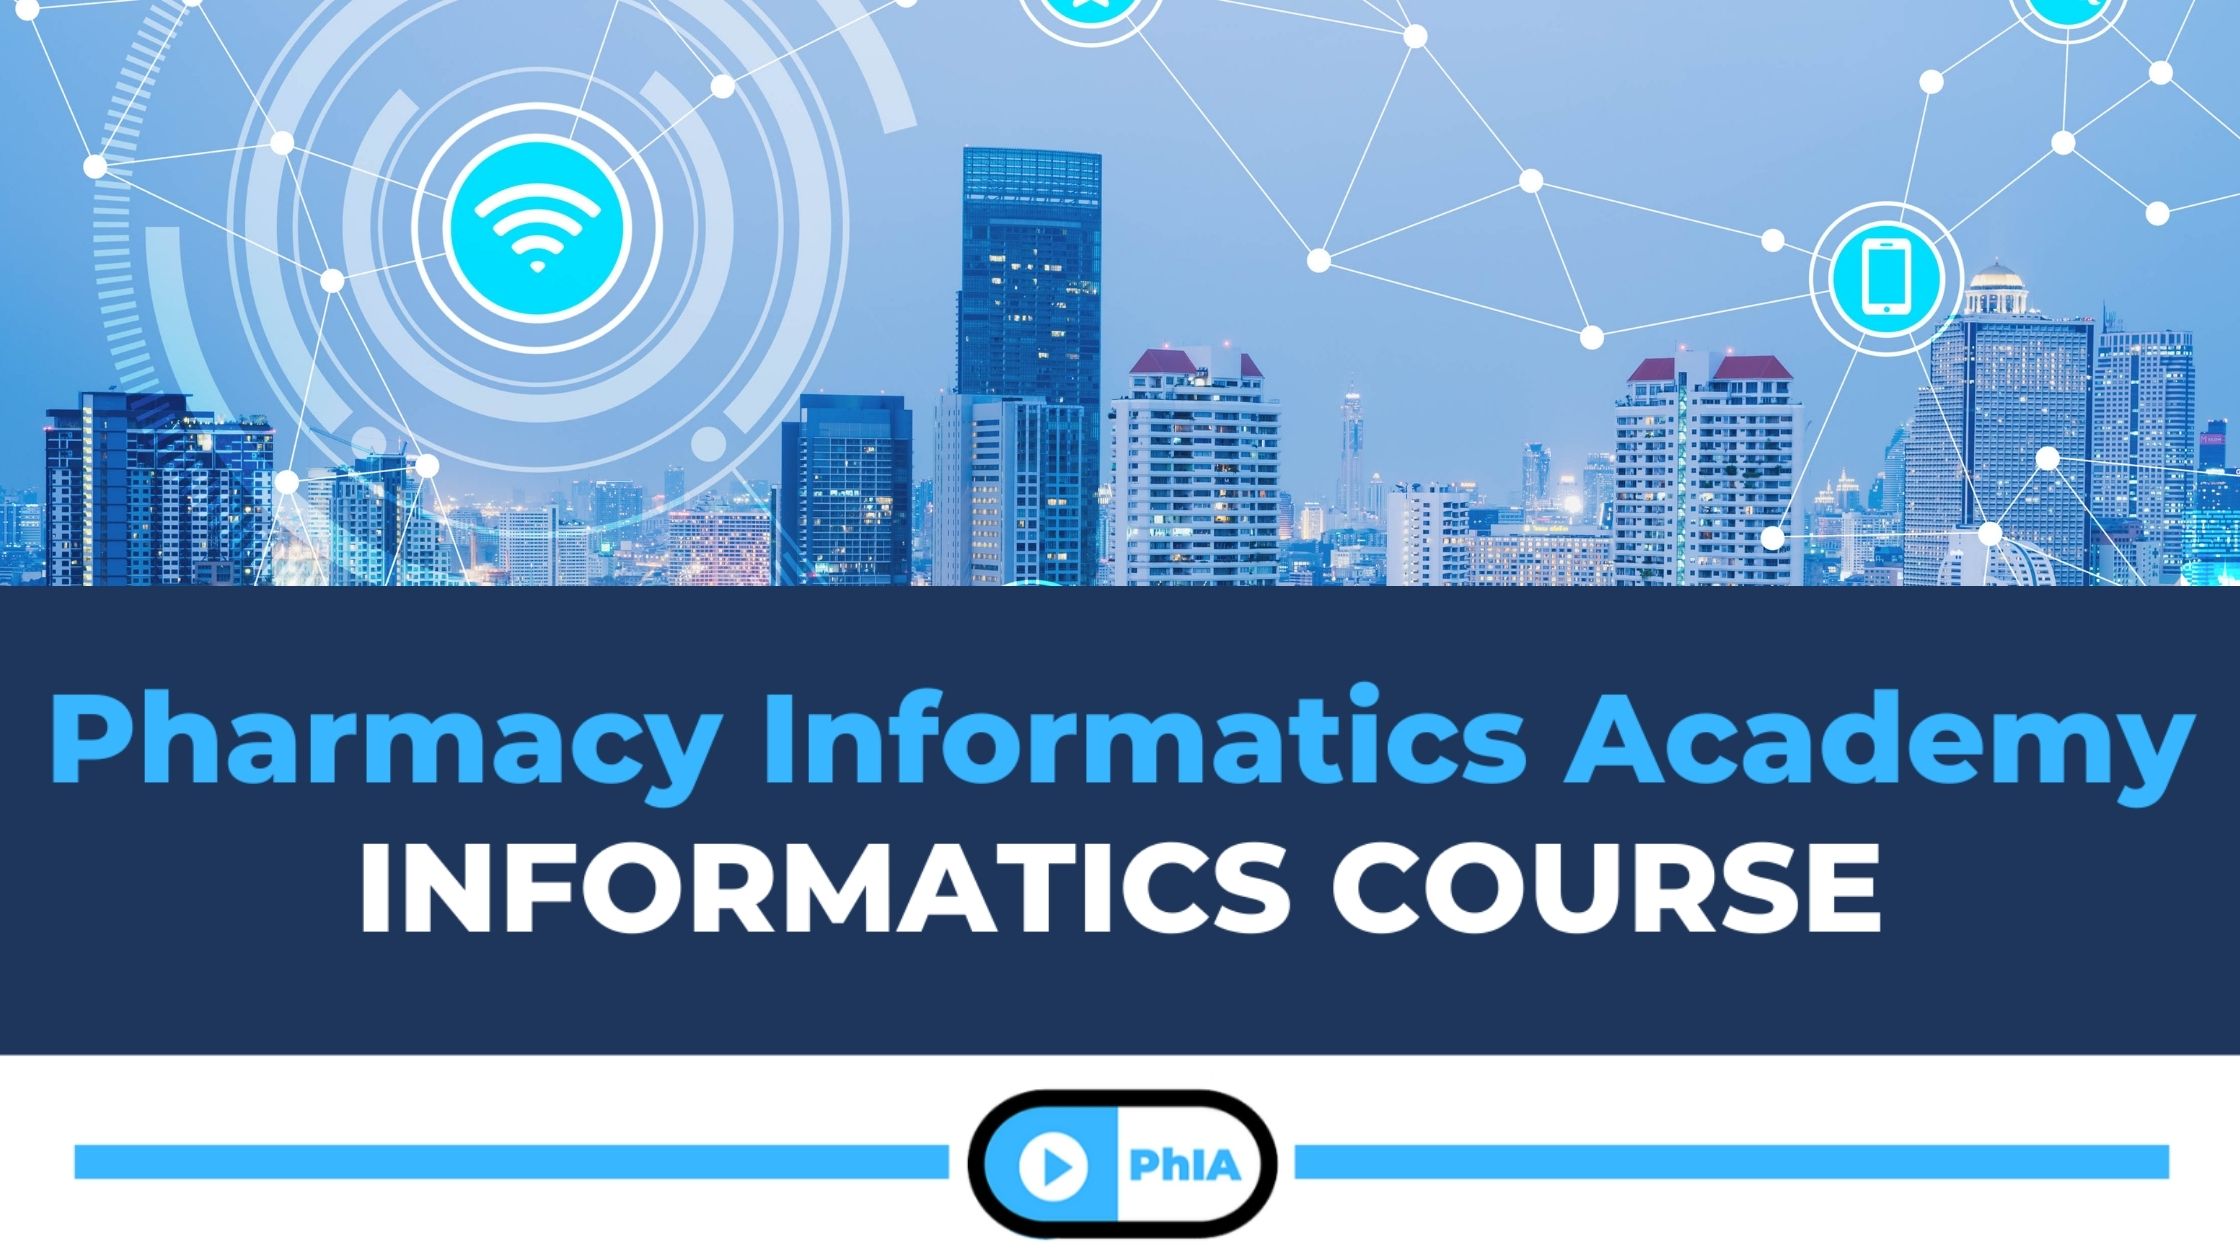 The Pharmacy Informatics Course Coming Soon